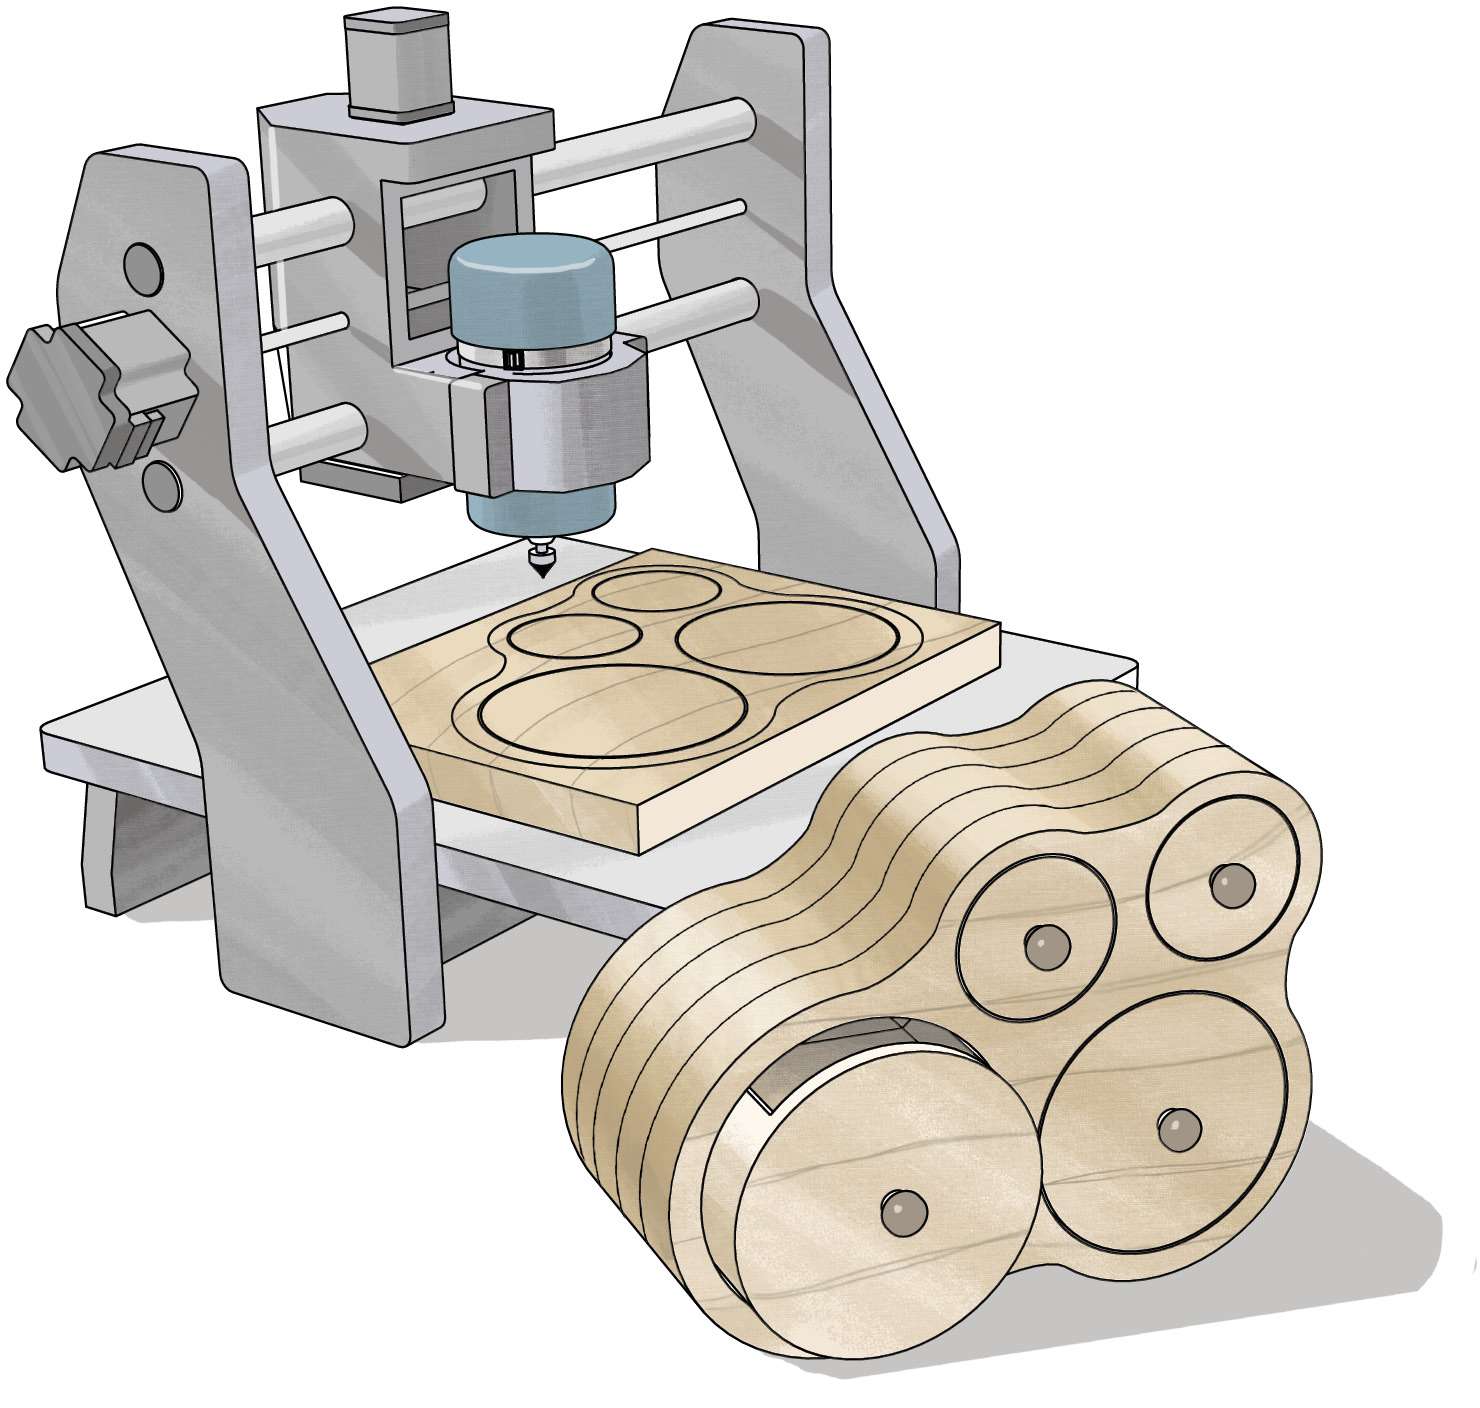 Drawing of CNC router making pattern on project